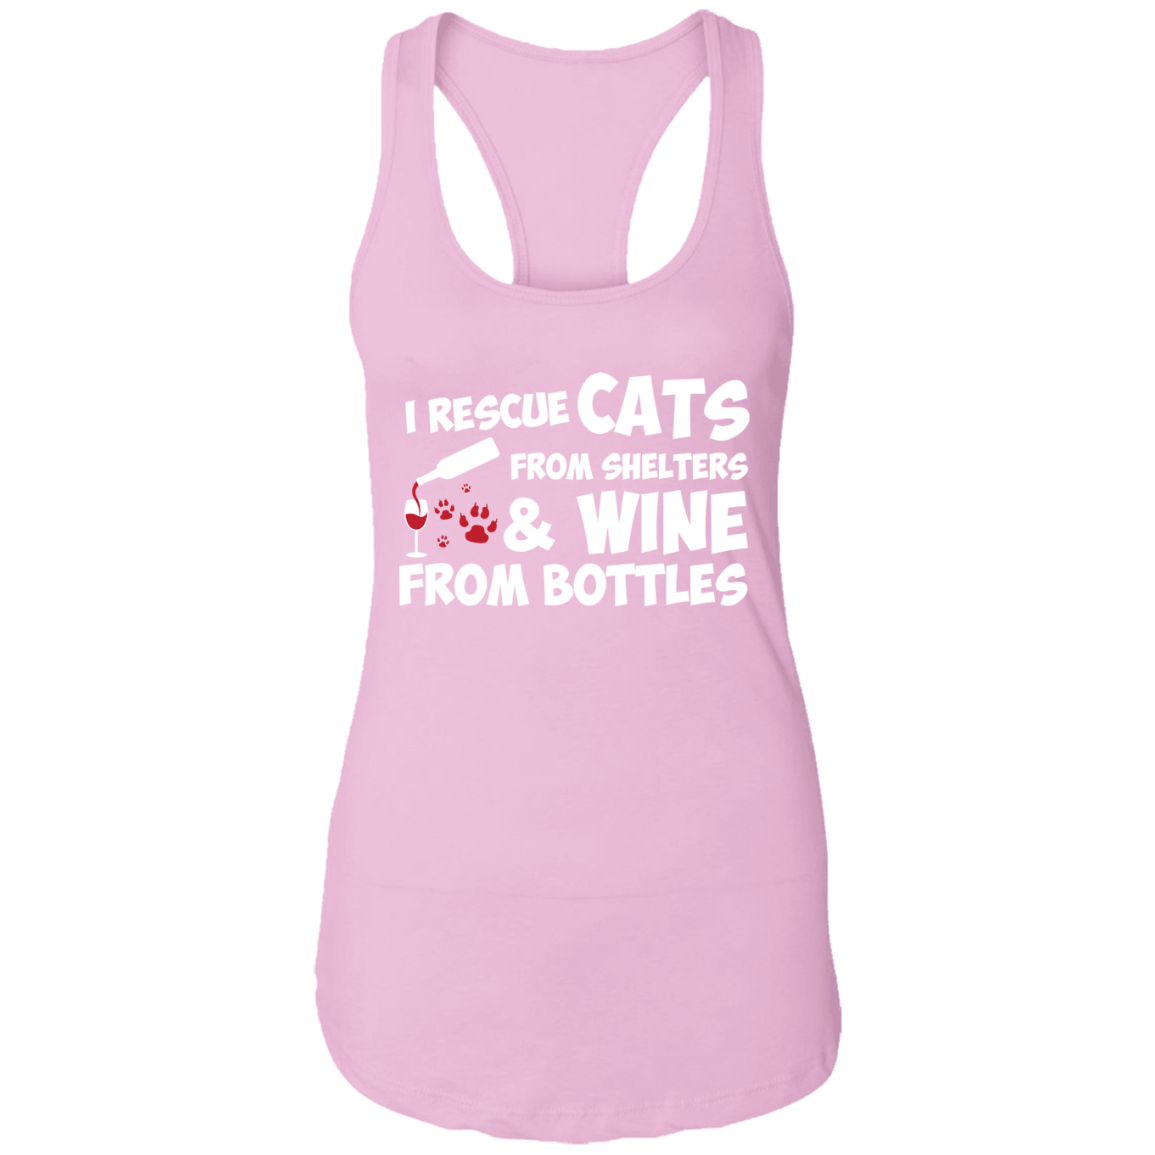 I Rescue Cats And Wine - Ladies Racer Back Tank.